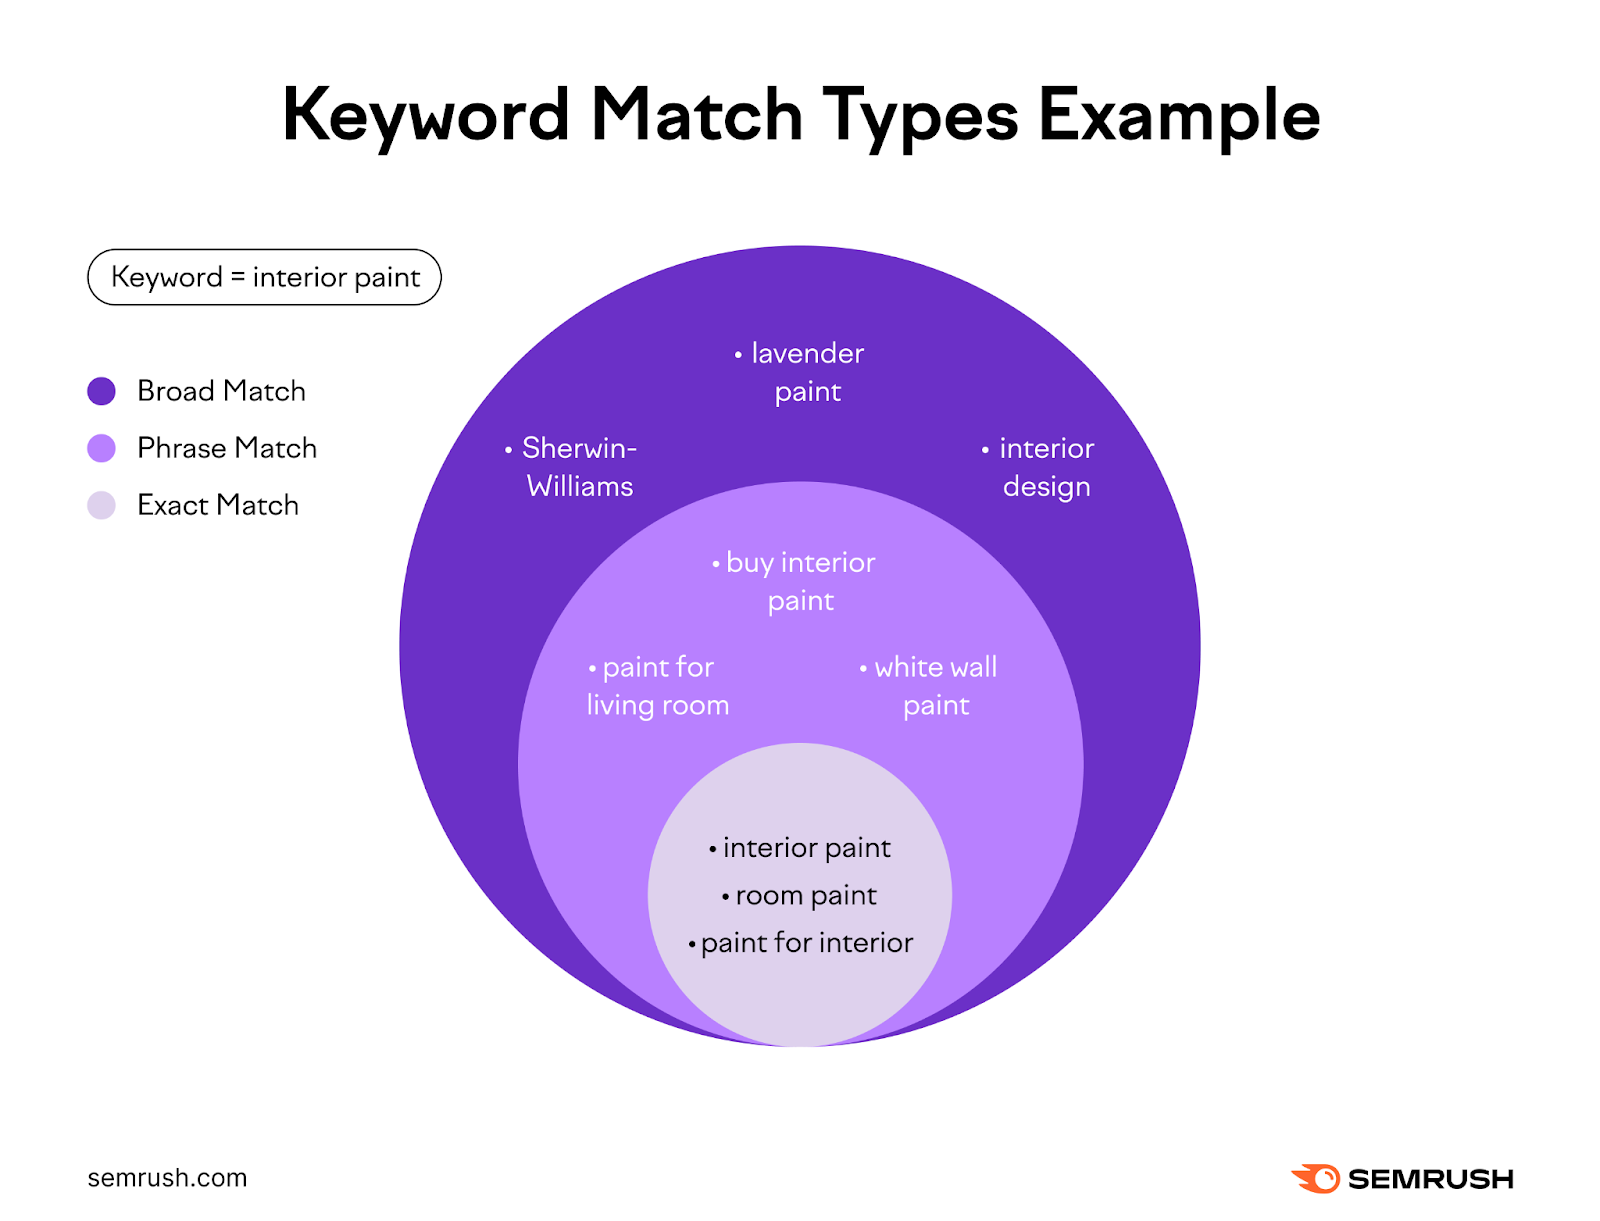 Keyword match types example for the keyword interior paint. Broad match are sherwin-williams, lavender paint, and interior design. Phrase match are paint for living room, buy interior paint, and white wall paint. Exact match are interior paint, room paint, and paint for interior.